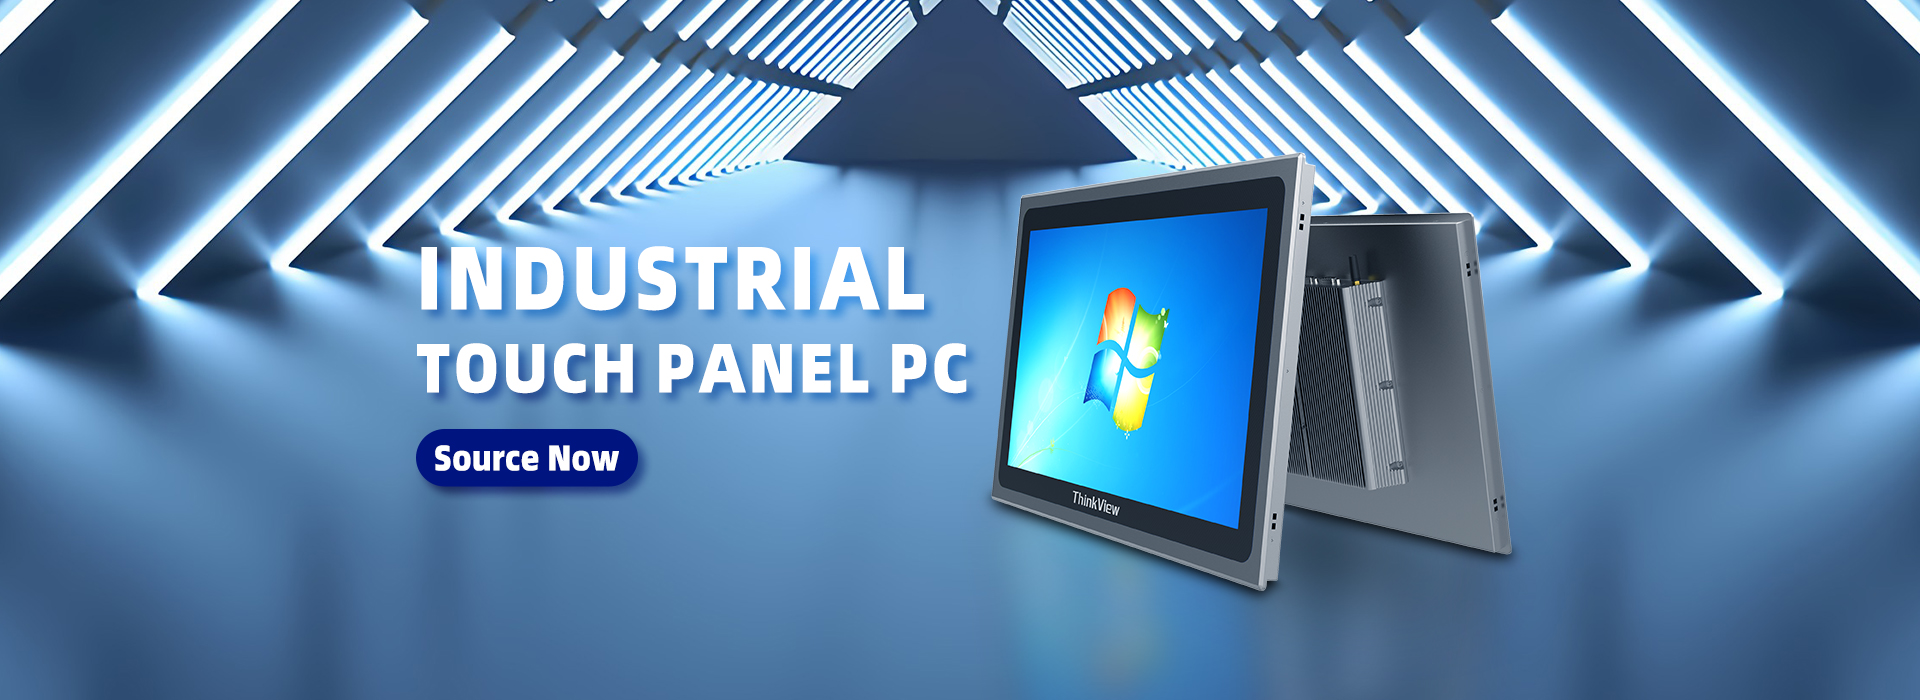 Industriell Touch Panel PC